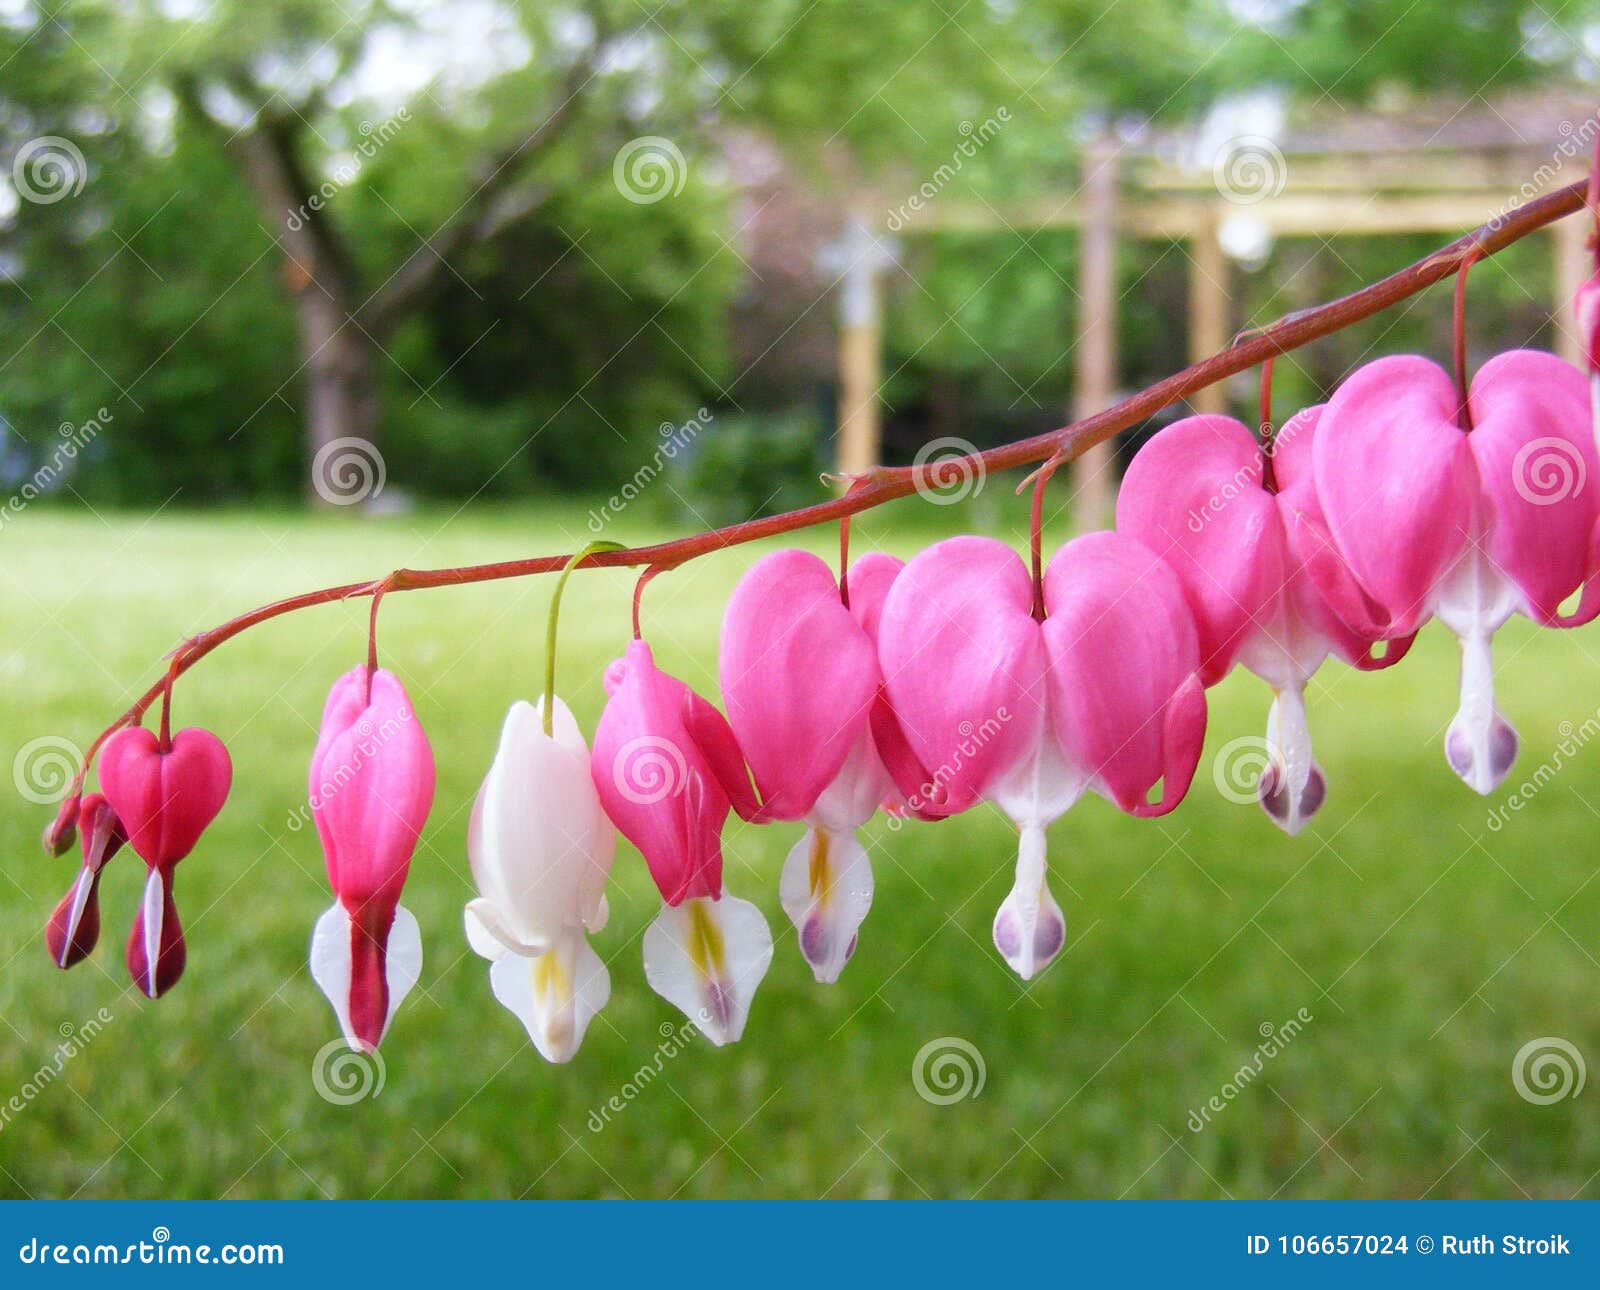 Bleeding Heart Flowers Hanging From Stem Stock Photo Image Of Pink Nature 106657024